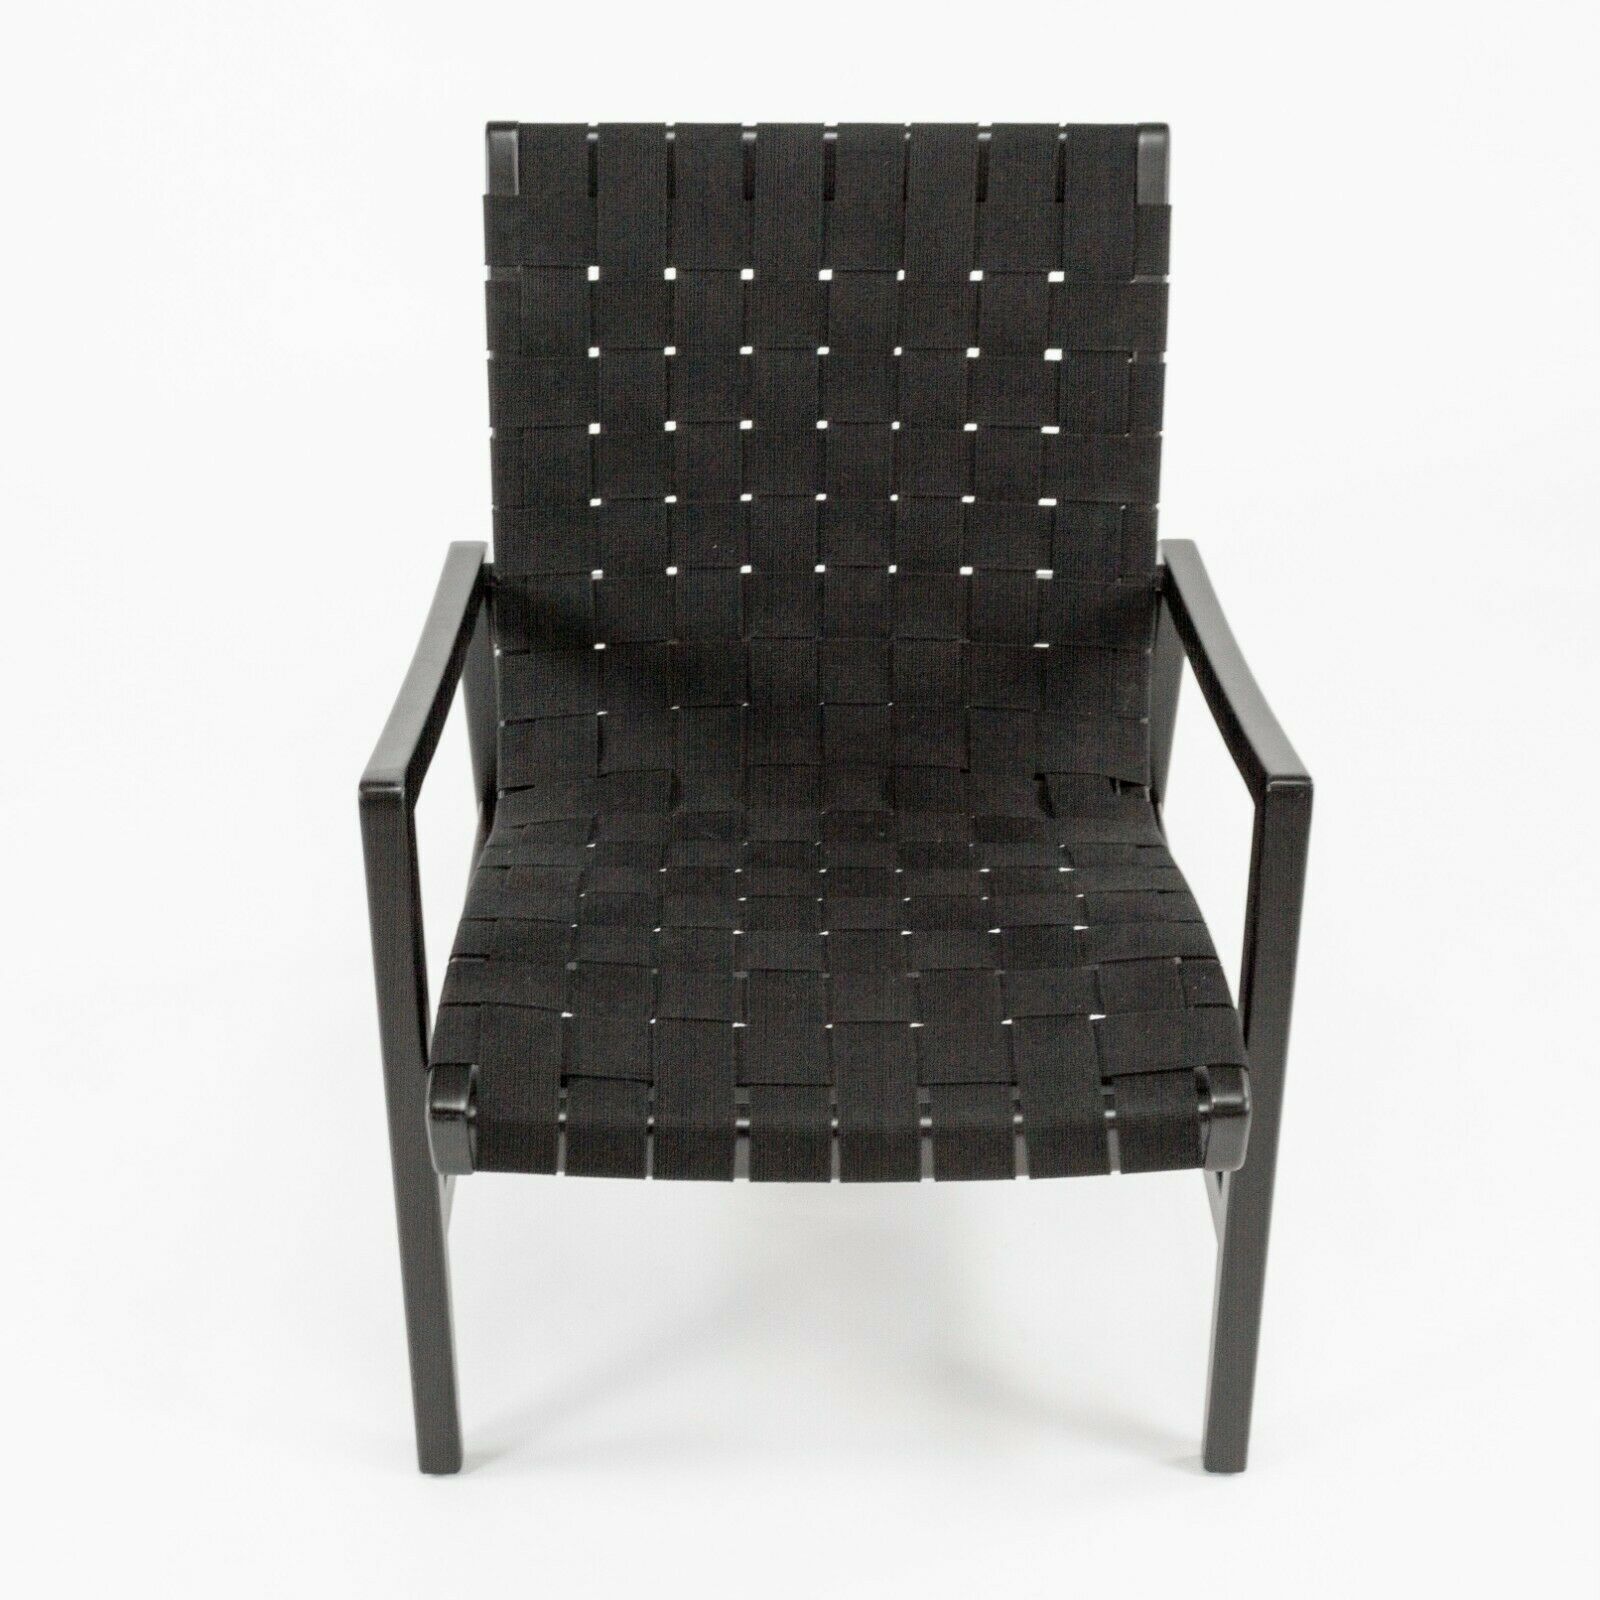 SOLD 2021 Jens Risom for Knoll Ebonized Maple & Black Cotton Lounge Chair with Arms